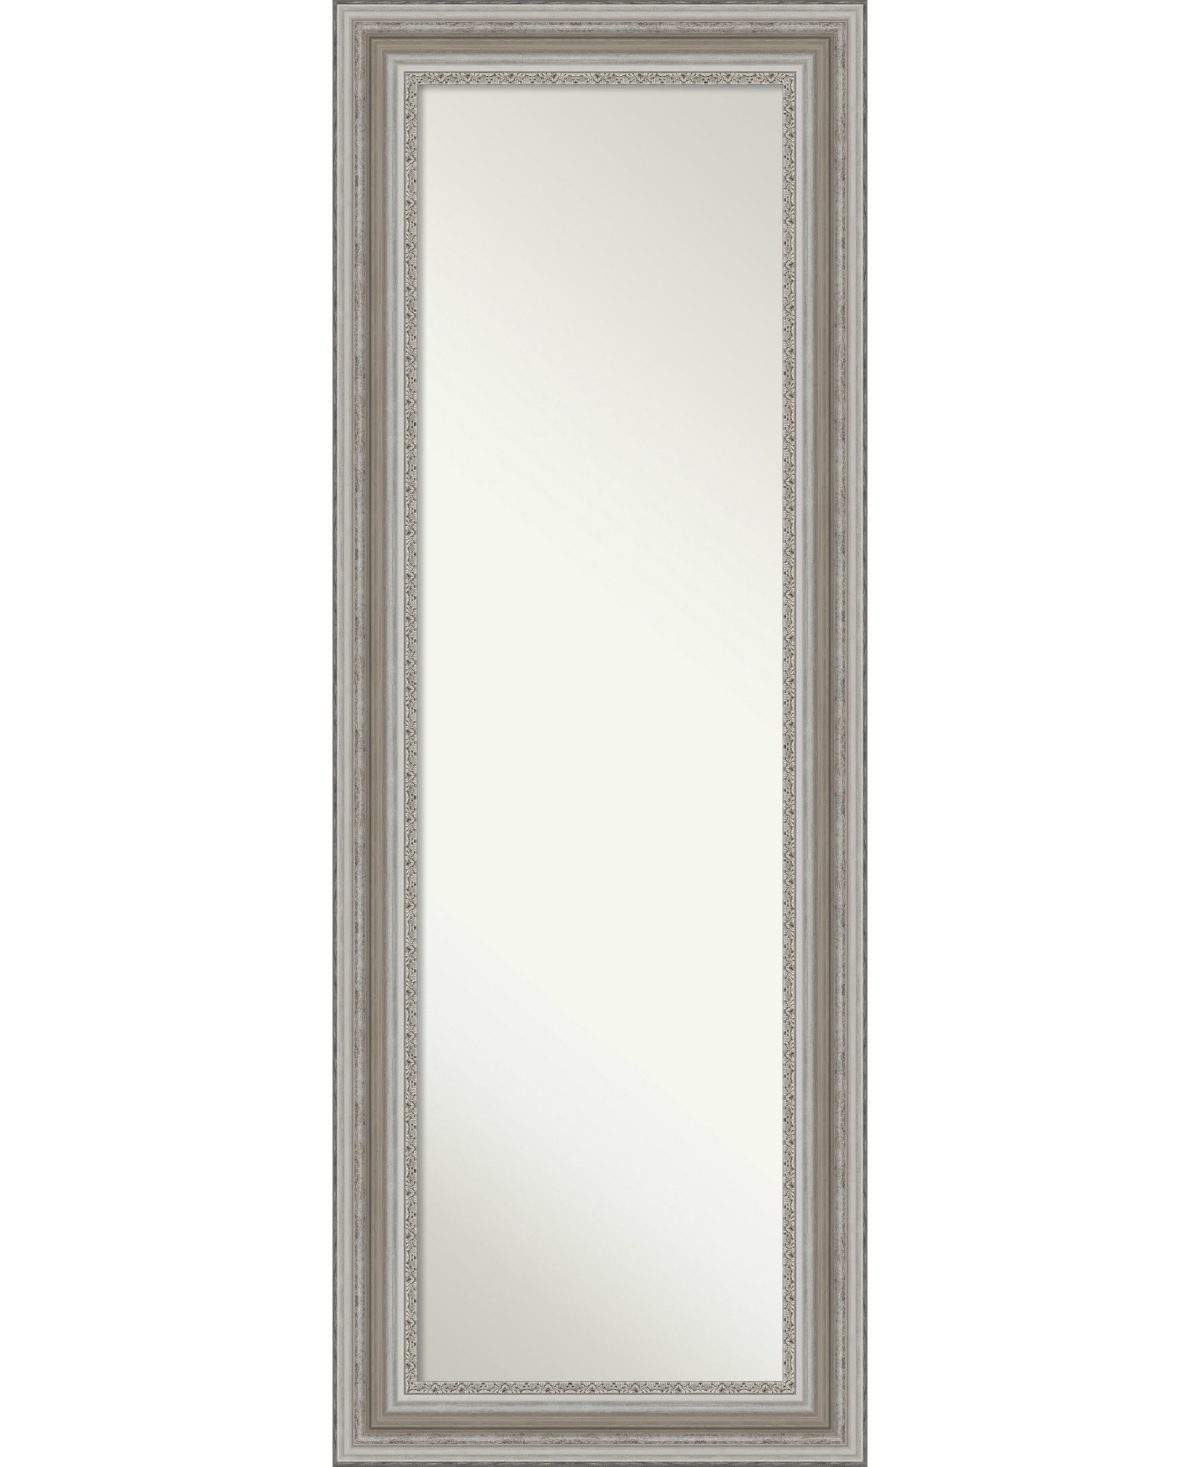 Parlor Silver-tone on The Door Full Length Mirror, 19.5" x 53.50" - Silver